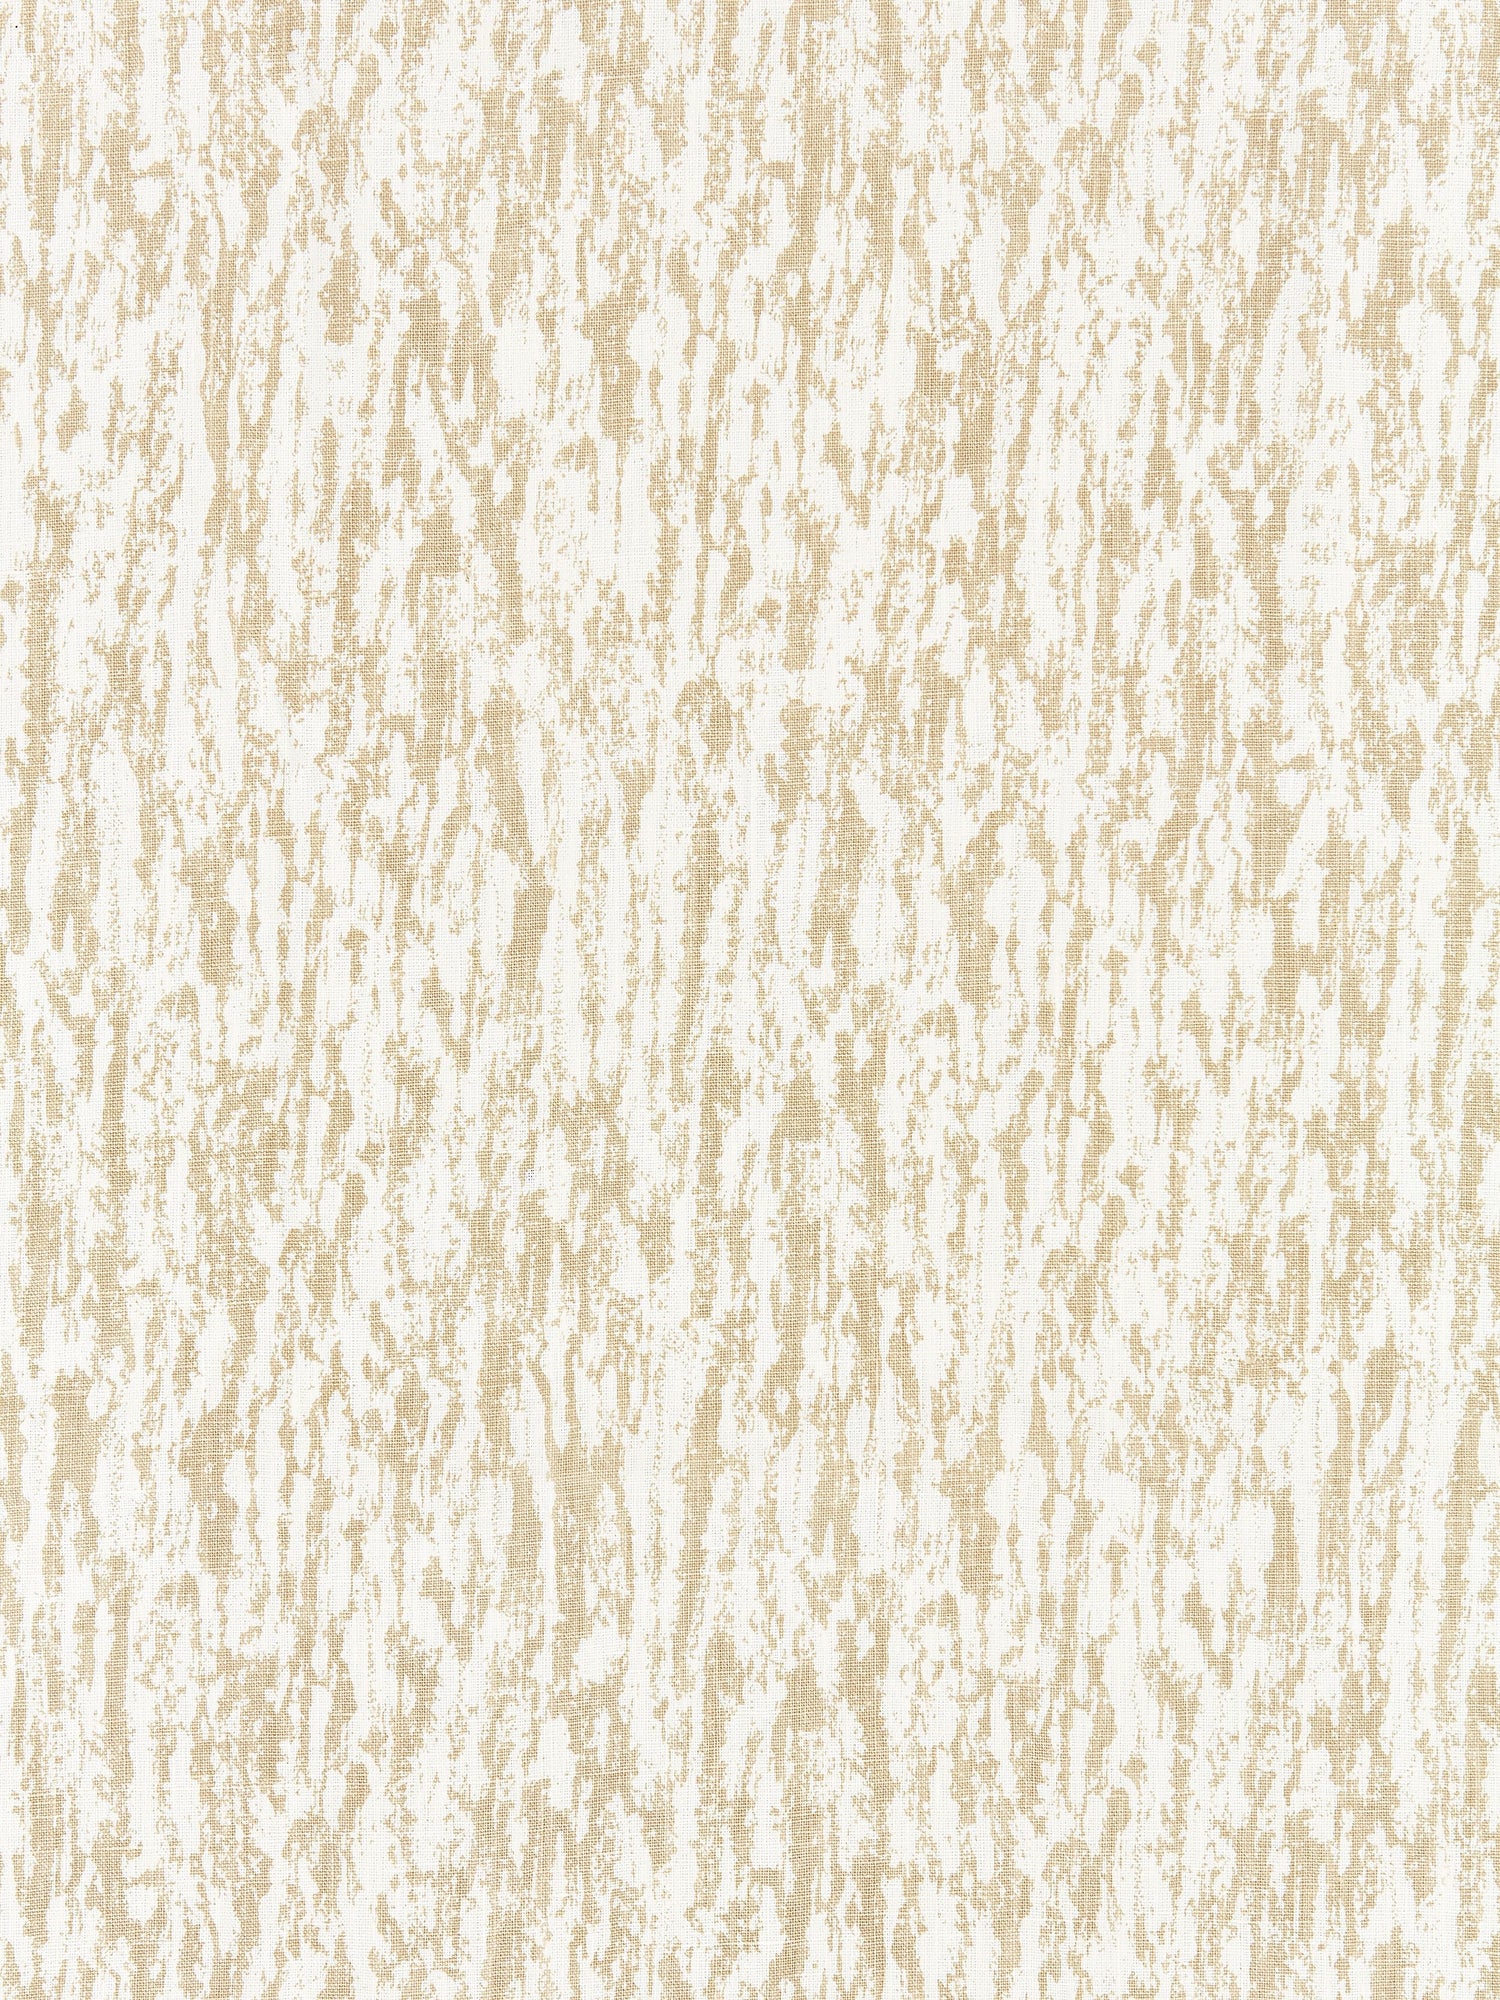 Sequoia Linen Print fabric in sand color - pattern number SC 000116599 - by Scalamandre in the Scalamandre Fabrics Book 1 collection